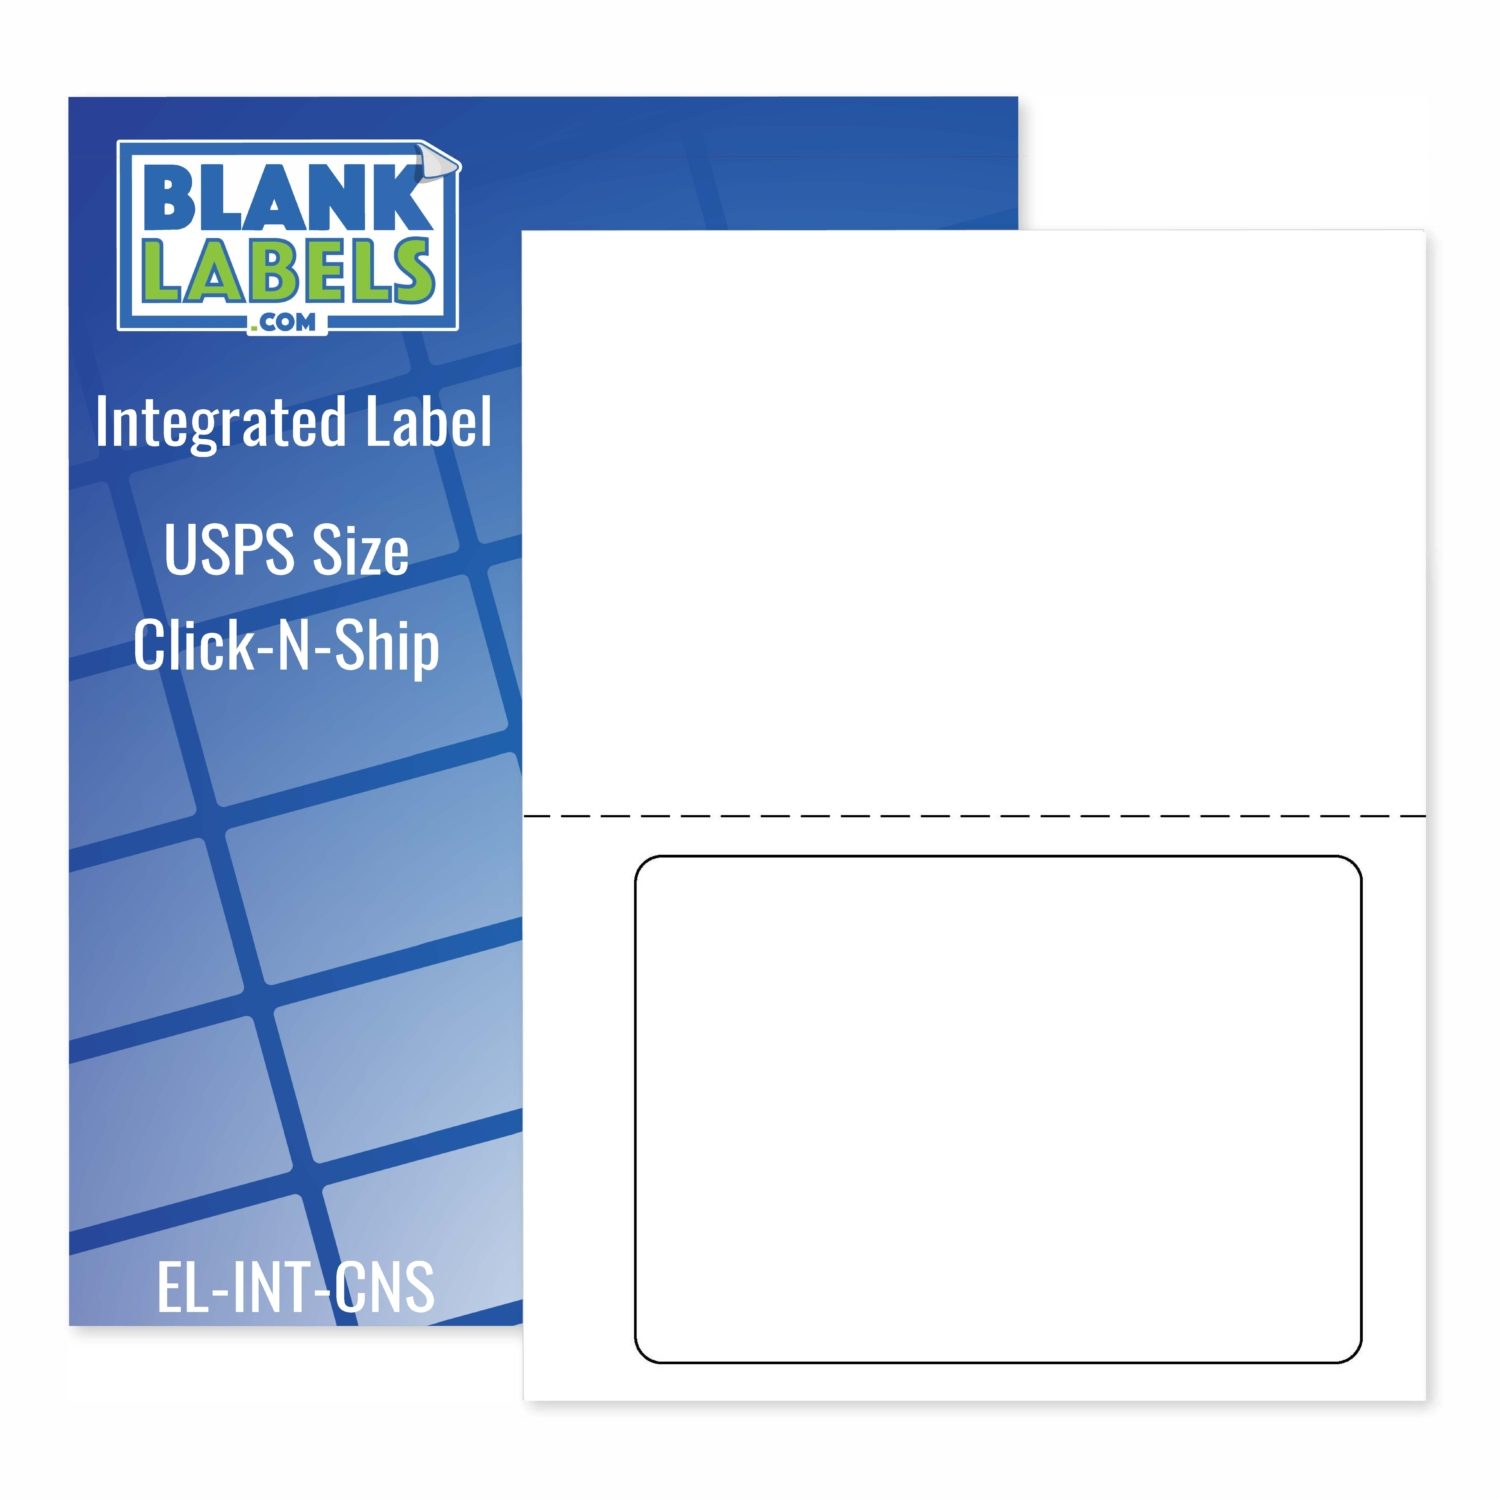 usps-click-n-ship-labels-with-paper-receipts-blank-labels